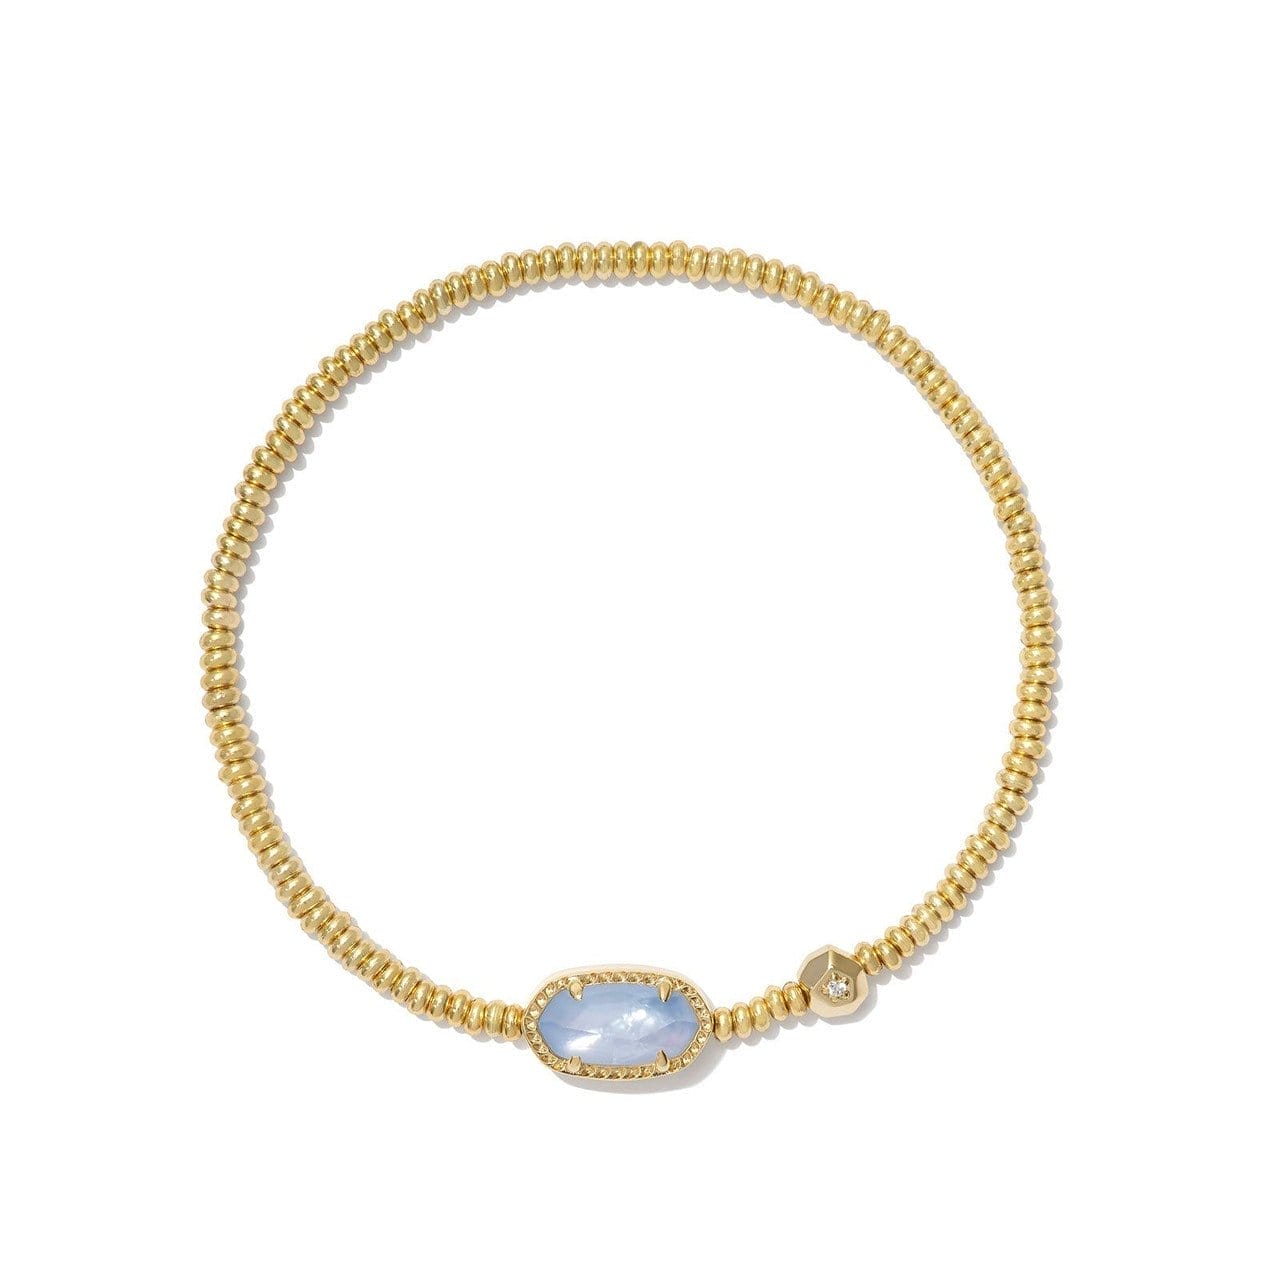 Image of Kendra Scott Grayson Stretch Bracelet in Gold Periwinkle Illusion